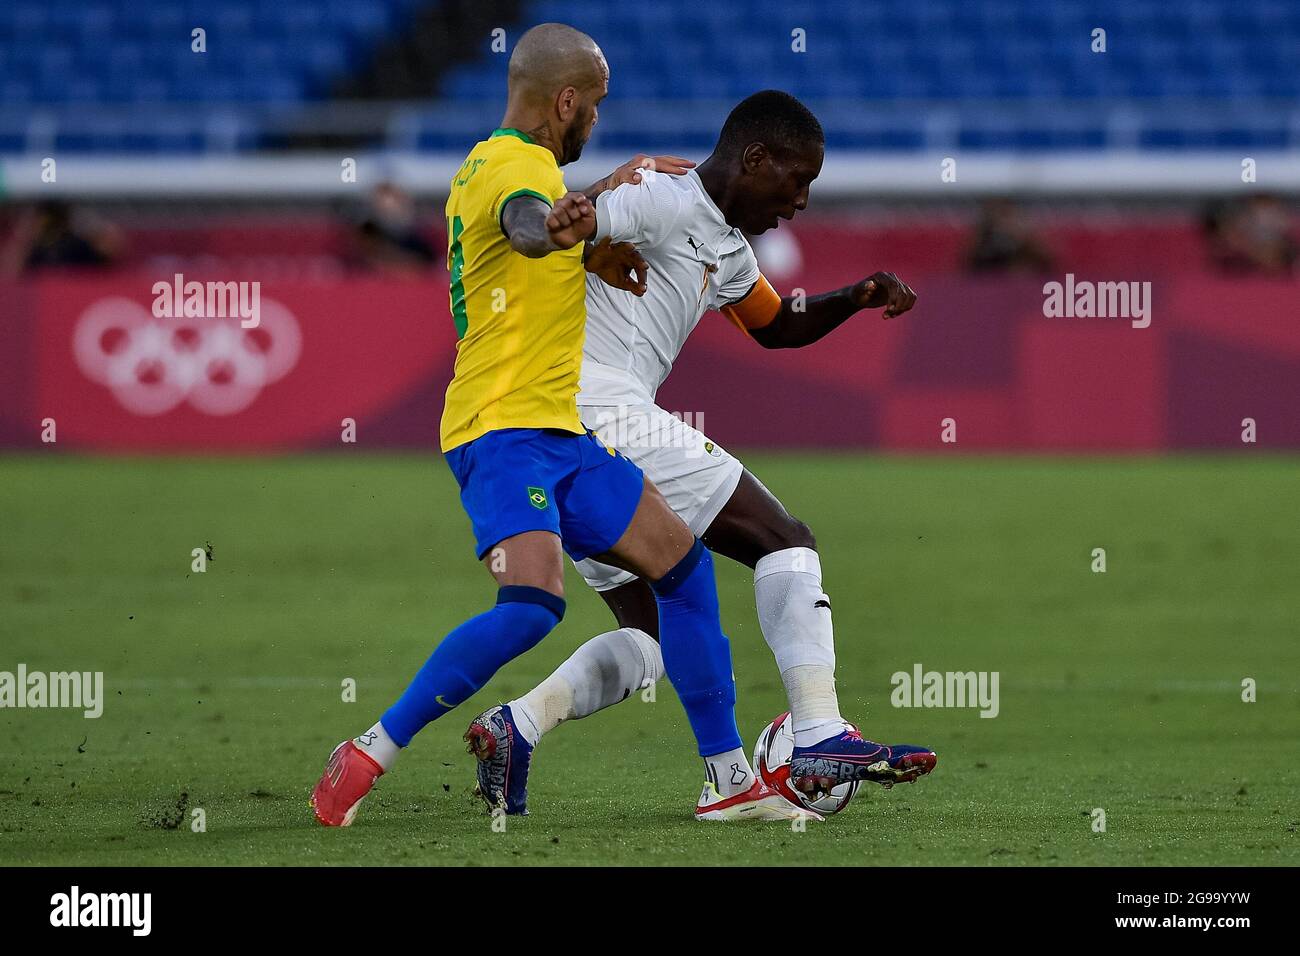 YOKOHAMA, JAPAN - JULY 25: Dani Alves of Brazil and Max Gradel of Ivory Coast during the Tokyo 2020 Olympic Mens Football Tournament match between Brazil and Ivory Coast at Nissan Stadium on July 25, 2021 in Yokohama, Japan (Photo by Pablo Morano/Orange Pictures) Stock Photo